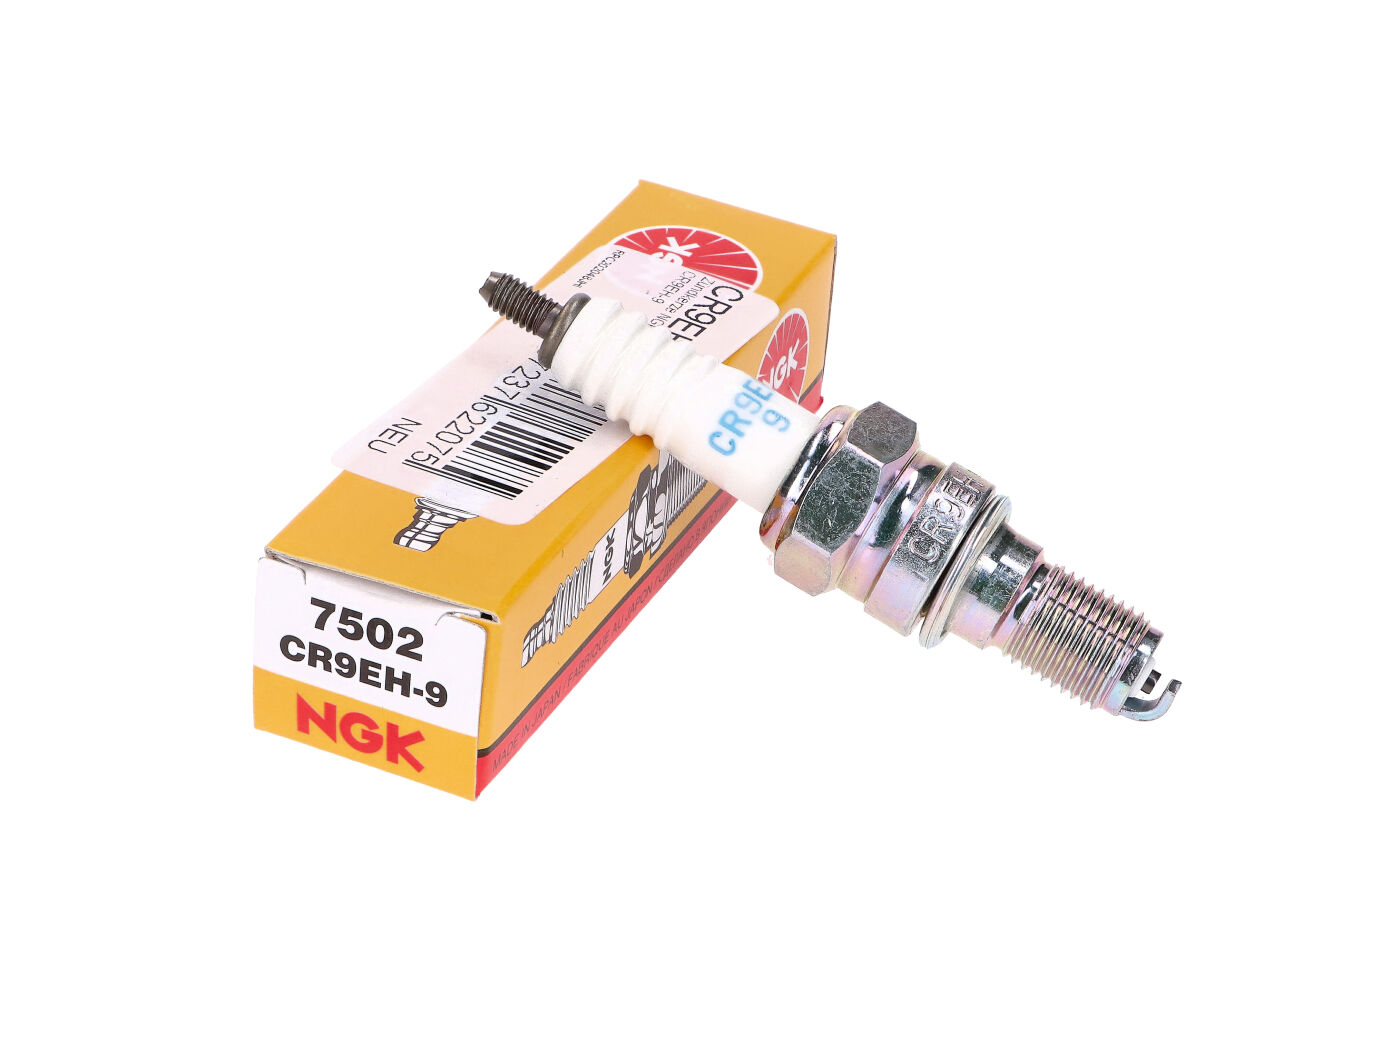 2 Pack New NGK Spark Plugs CR9EH-9   #7502 Two